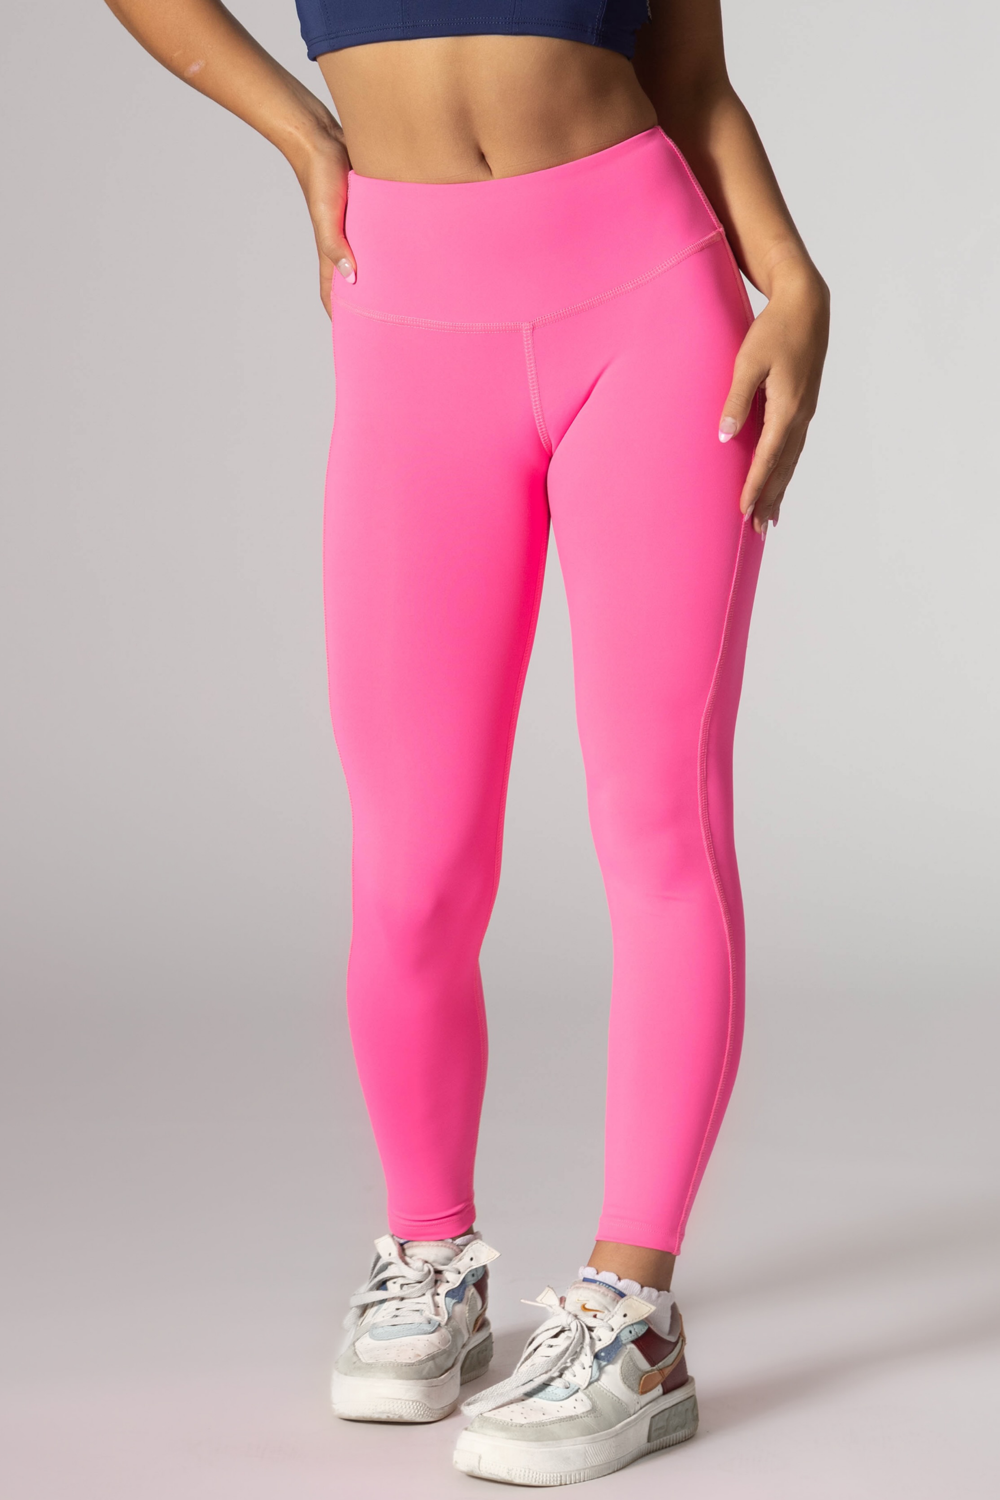 Buy HAPPY FRIDAYS Sport Yoga Shorts Over Tights DSG137 in Pink